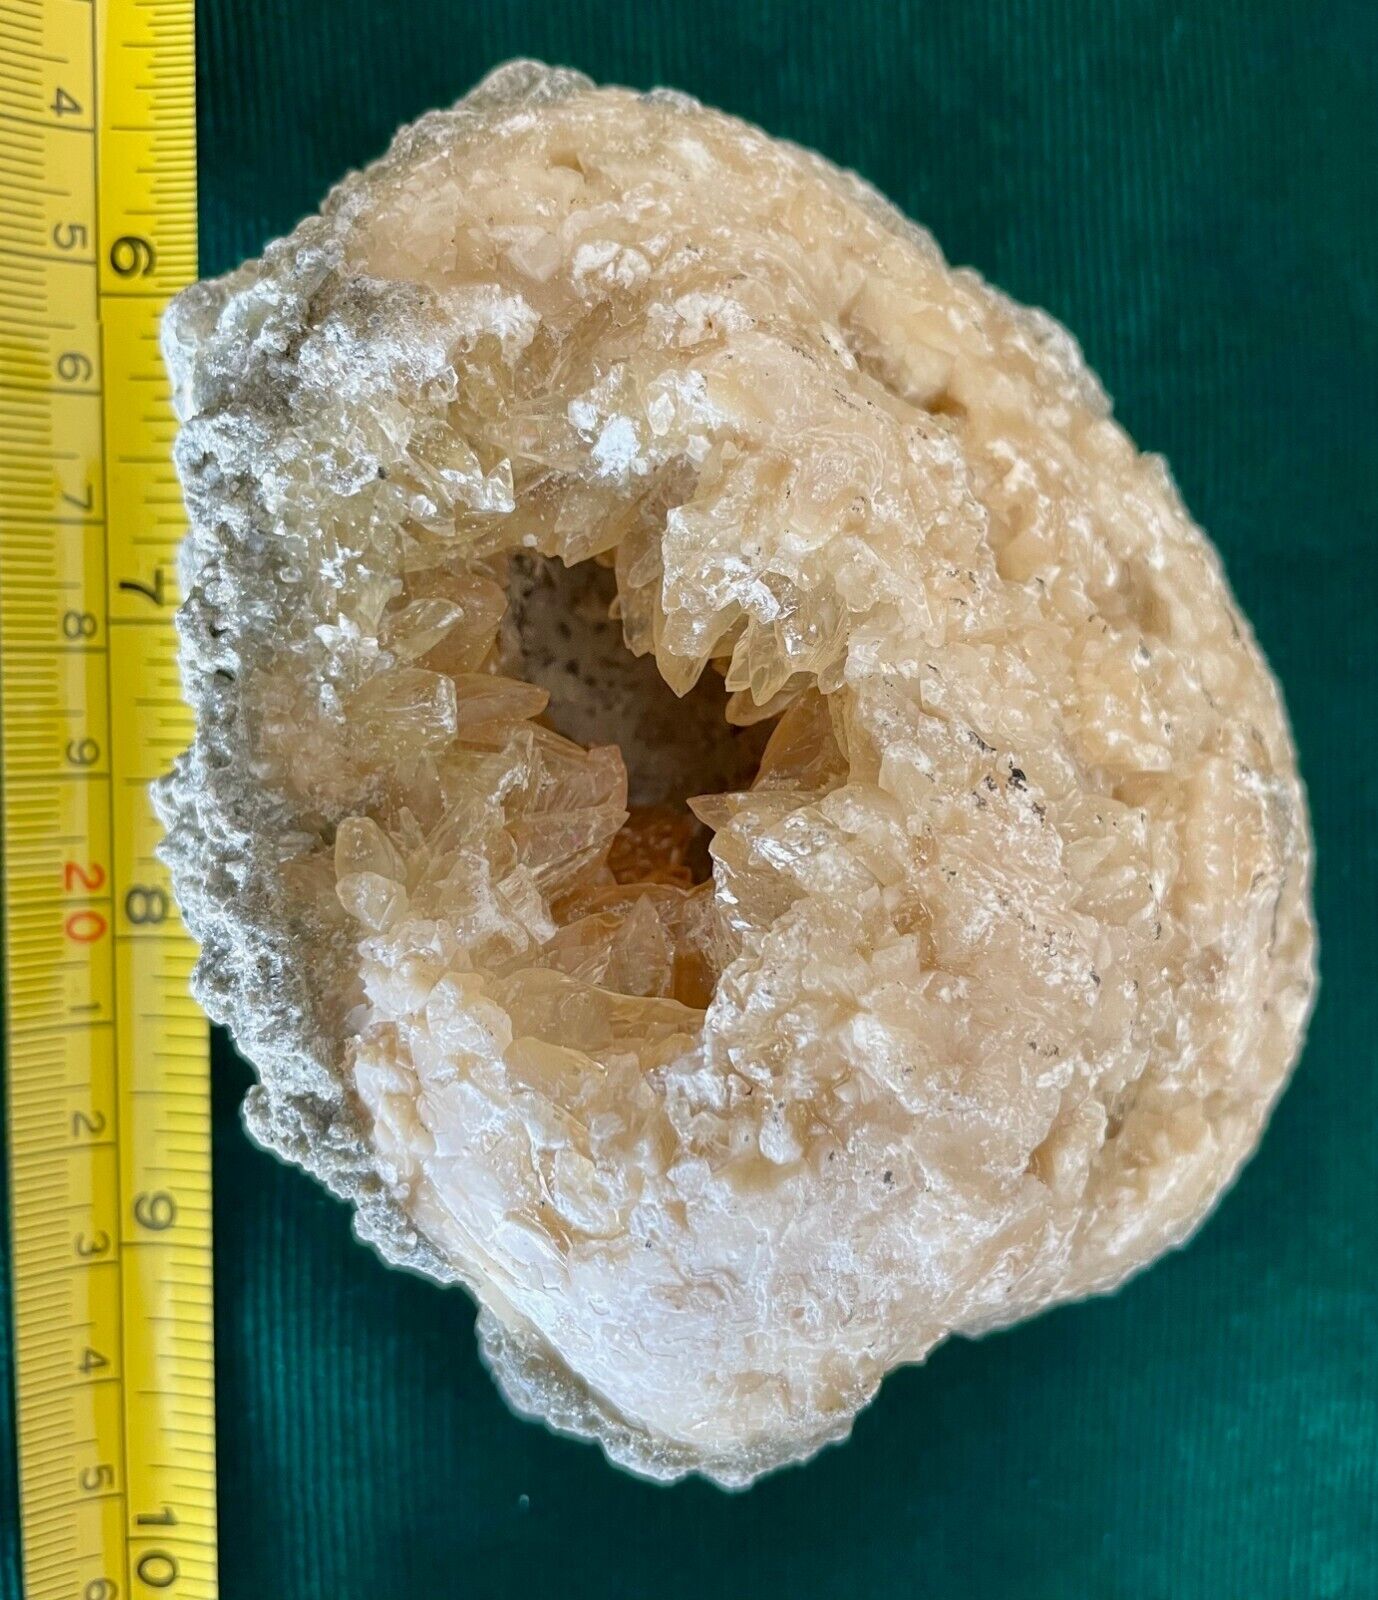 Fossil Calcite Clams with bright Dog Teeth pointed calcite